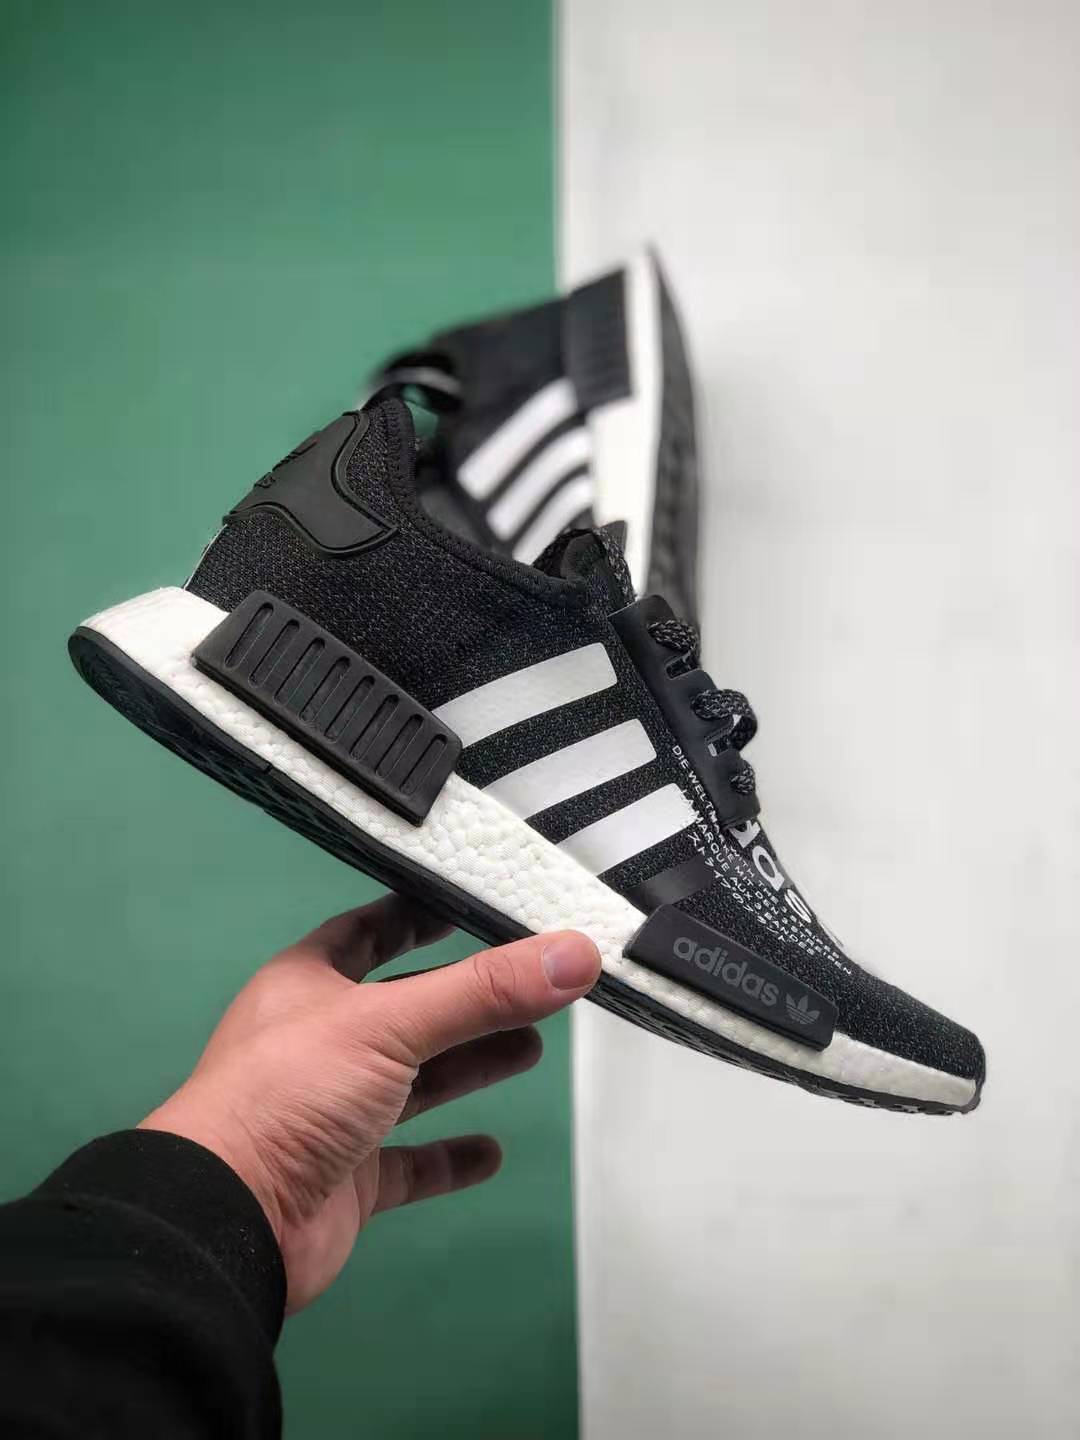 Adidas atmos x NMD_R1 'Black' G27331 - Top Notch Collaborative Sneakers